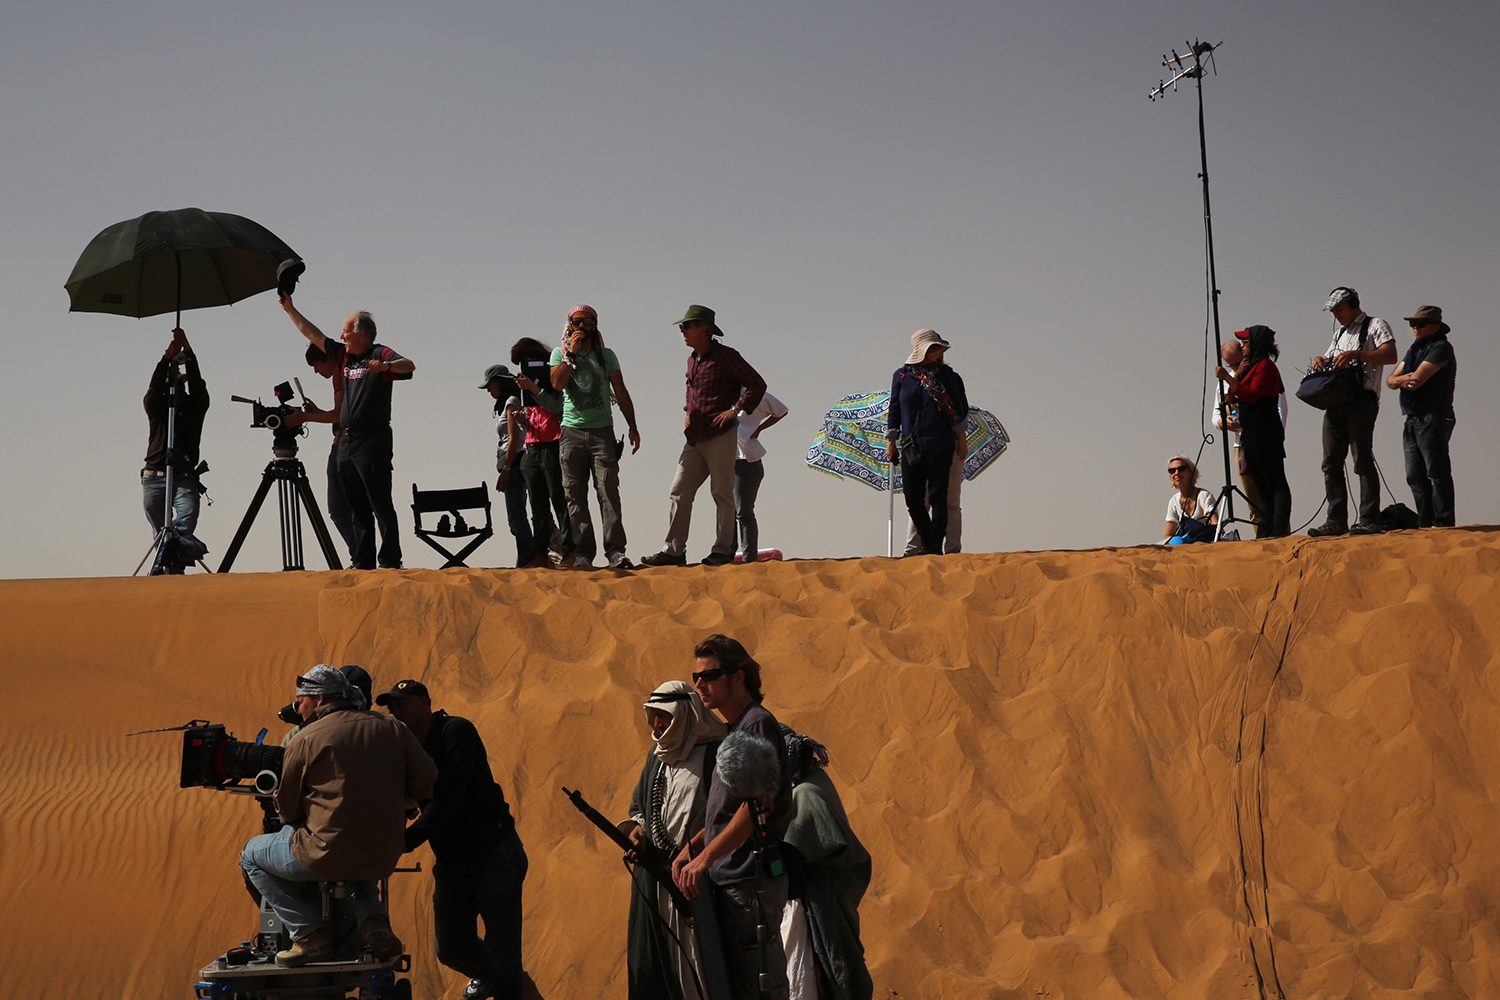 A large group with film equipment stands in the desert, some on a dune, some working with cameras, others talking or observing the situation.